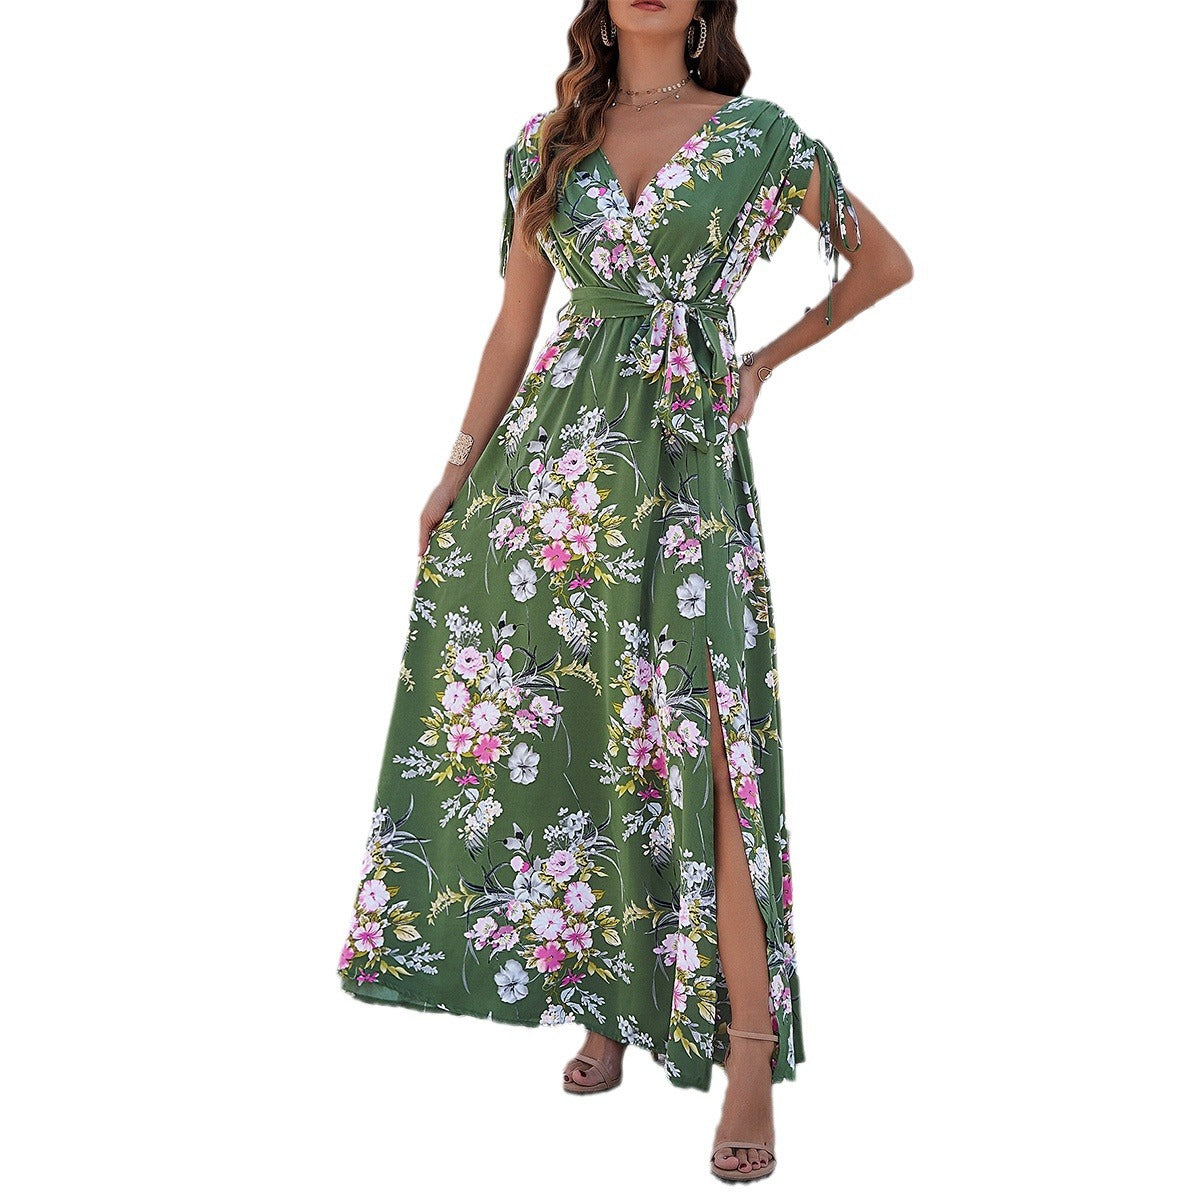 Women's Fashion Temperament Leisure Printed Lace-up Large Swing Dress